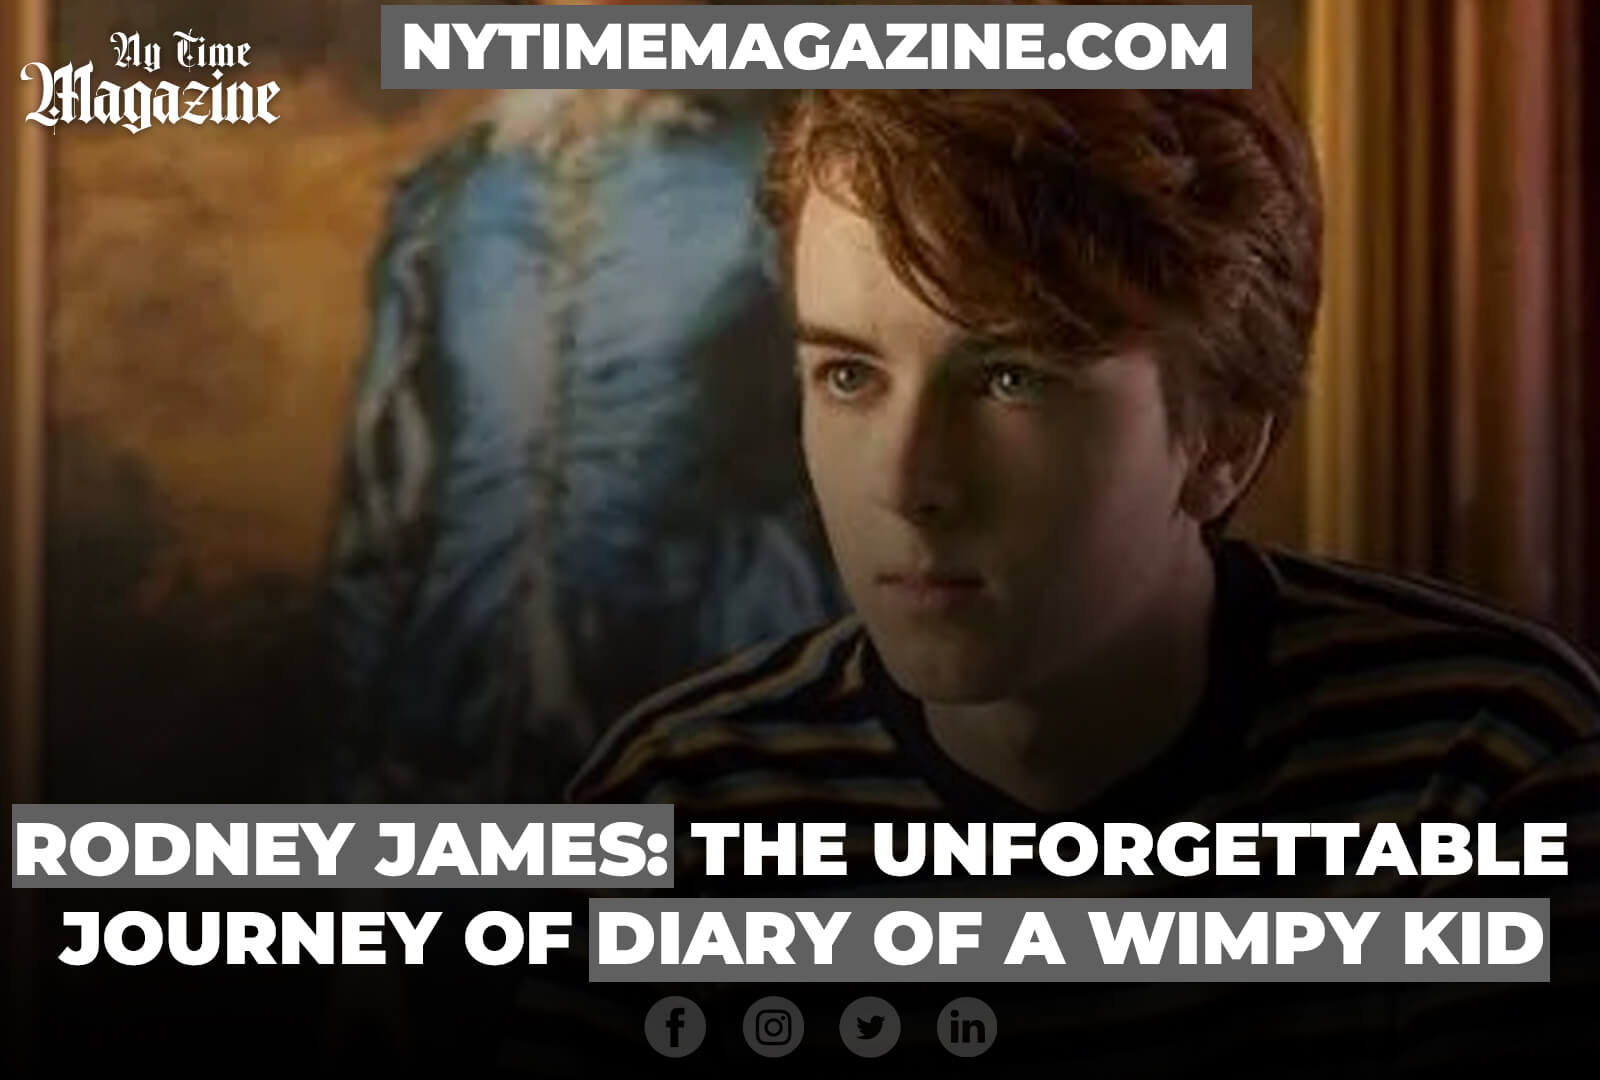 RODNEY JAMES: THE UNFORGETTABLE JOURNEY OF DIARY OF A WIMPY KID